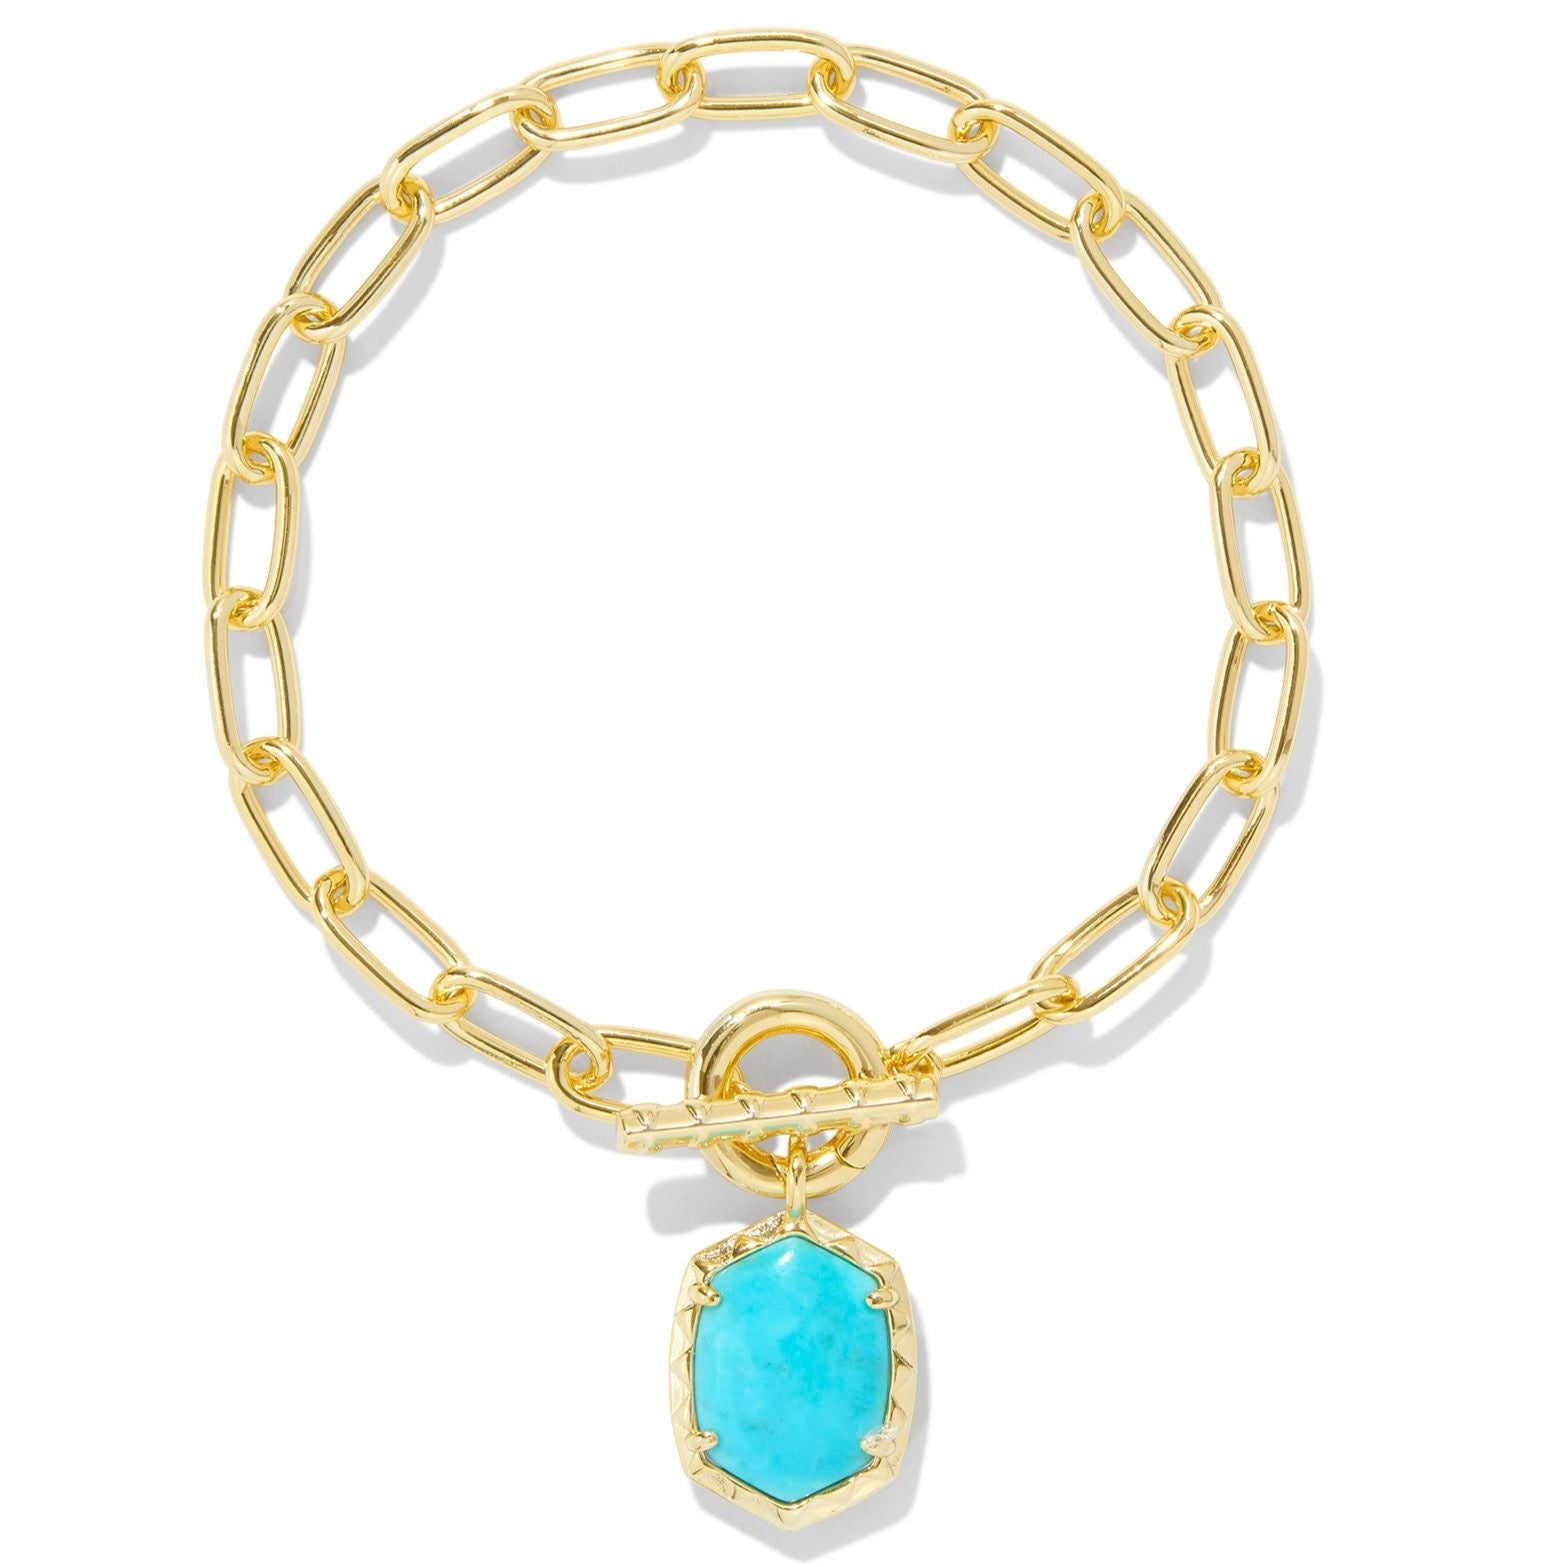 Kendra Scott | Daphne Gold Link and Chain Bracelet in Variegated Turquoise Magnesite - Giddy Up Glamour Boutique